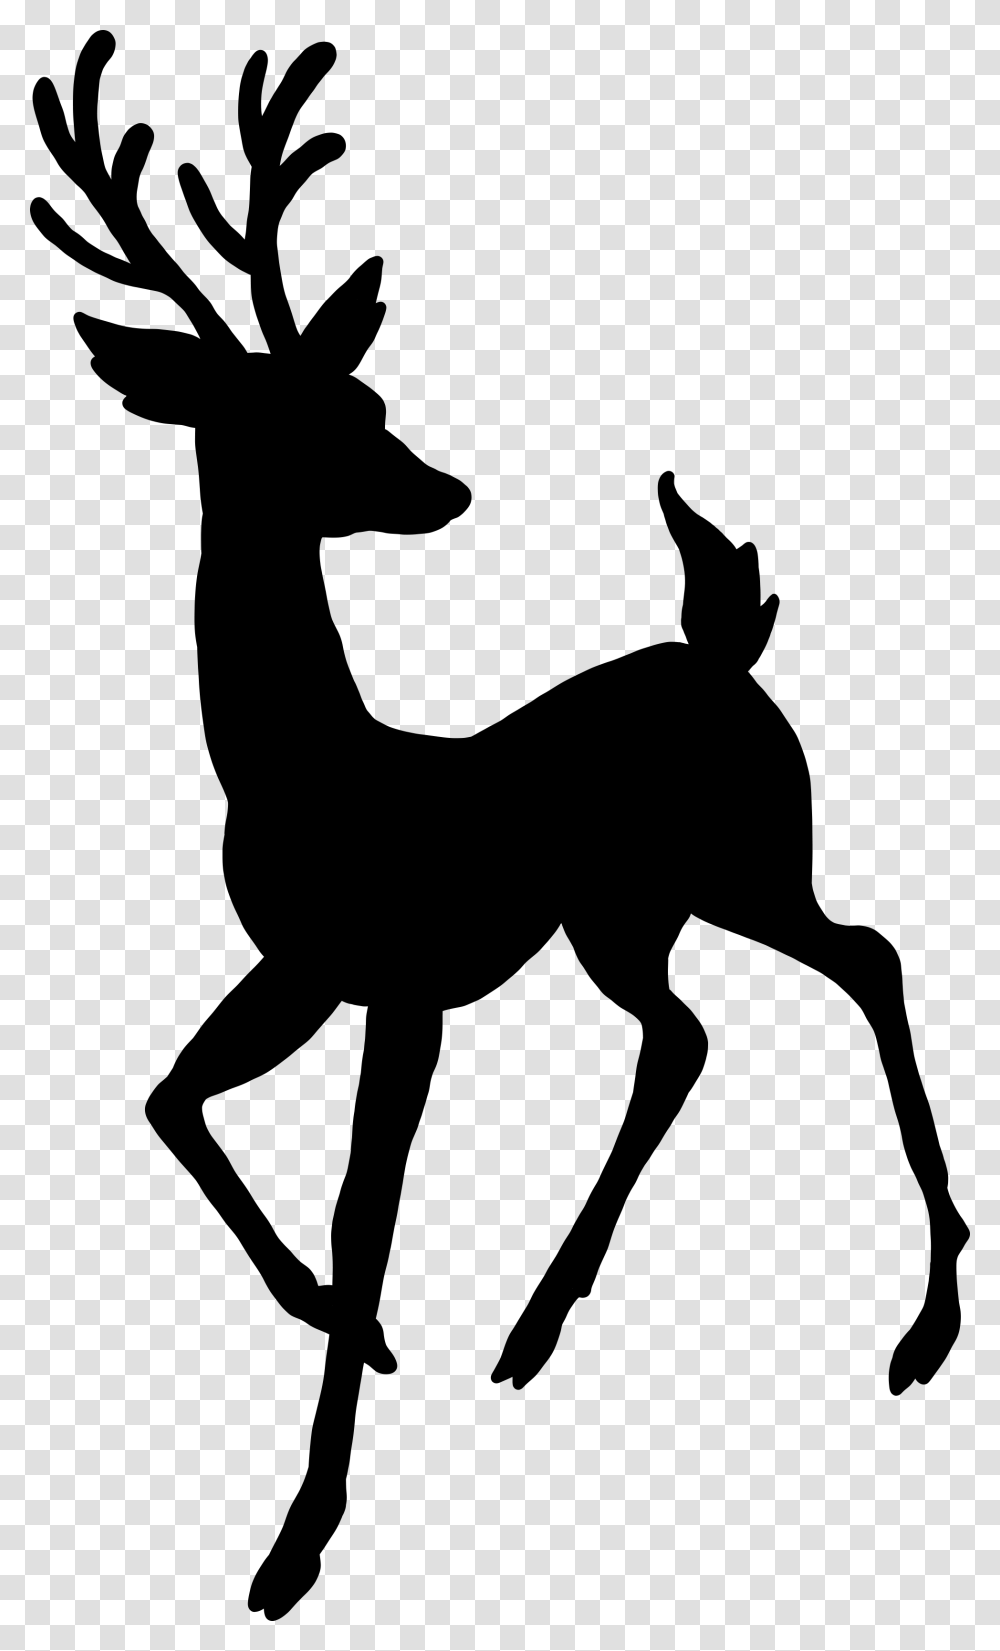 Reindeer Rudolph Christmas Graphics Silhouette Christmas Christmas Reindeer Silhouette Cut File, Gray, World Of Warcraft Transparent Png